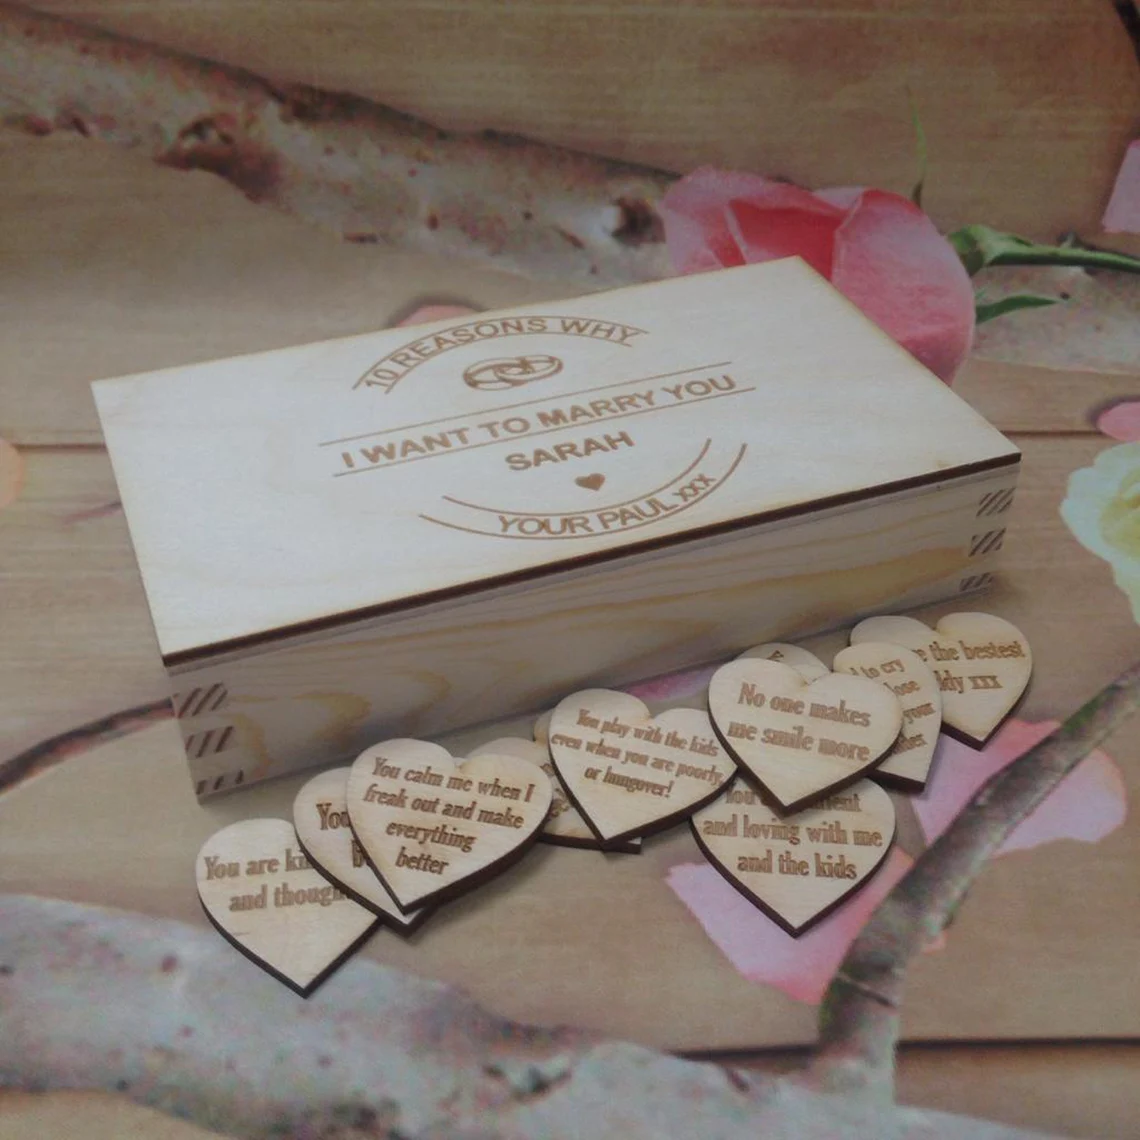 10 Reasons Why I Want to Marry You Wooden Box